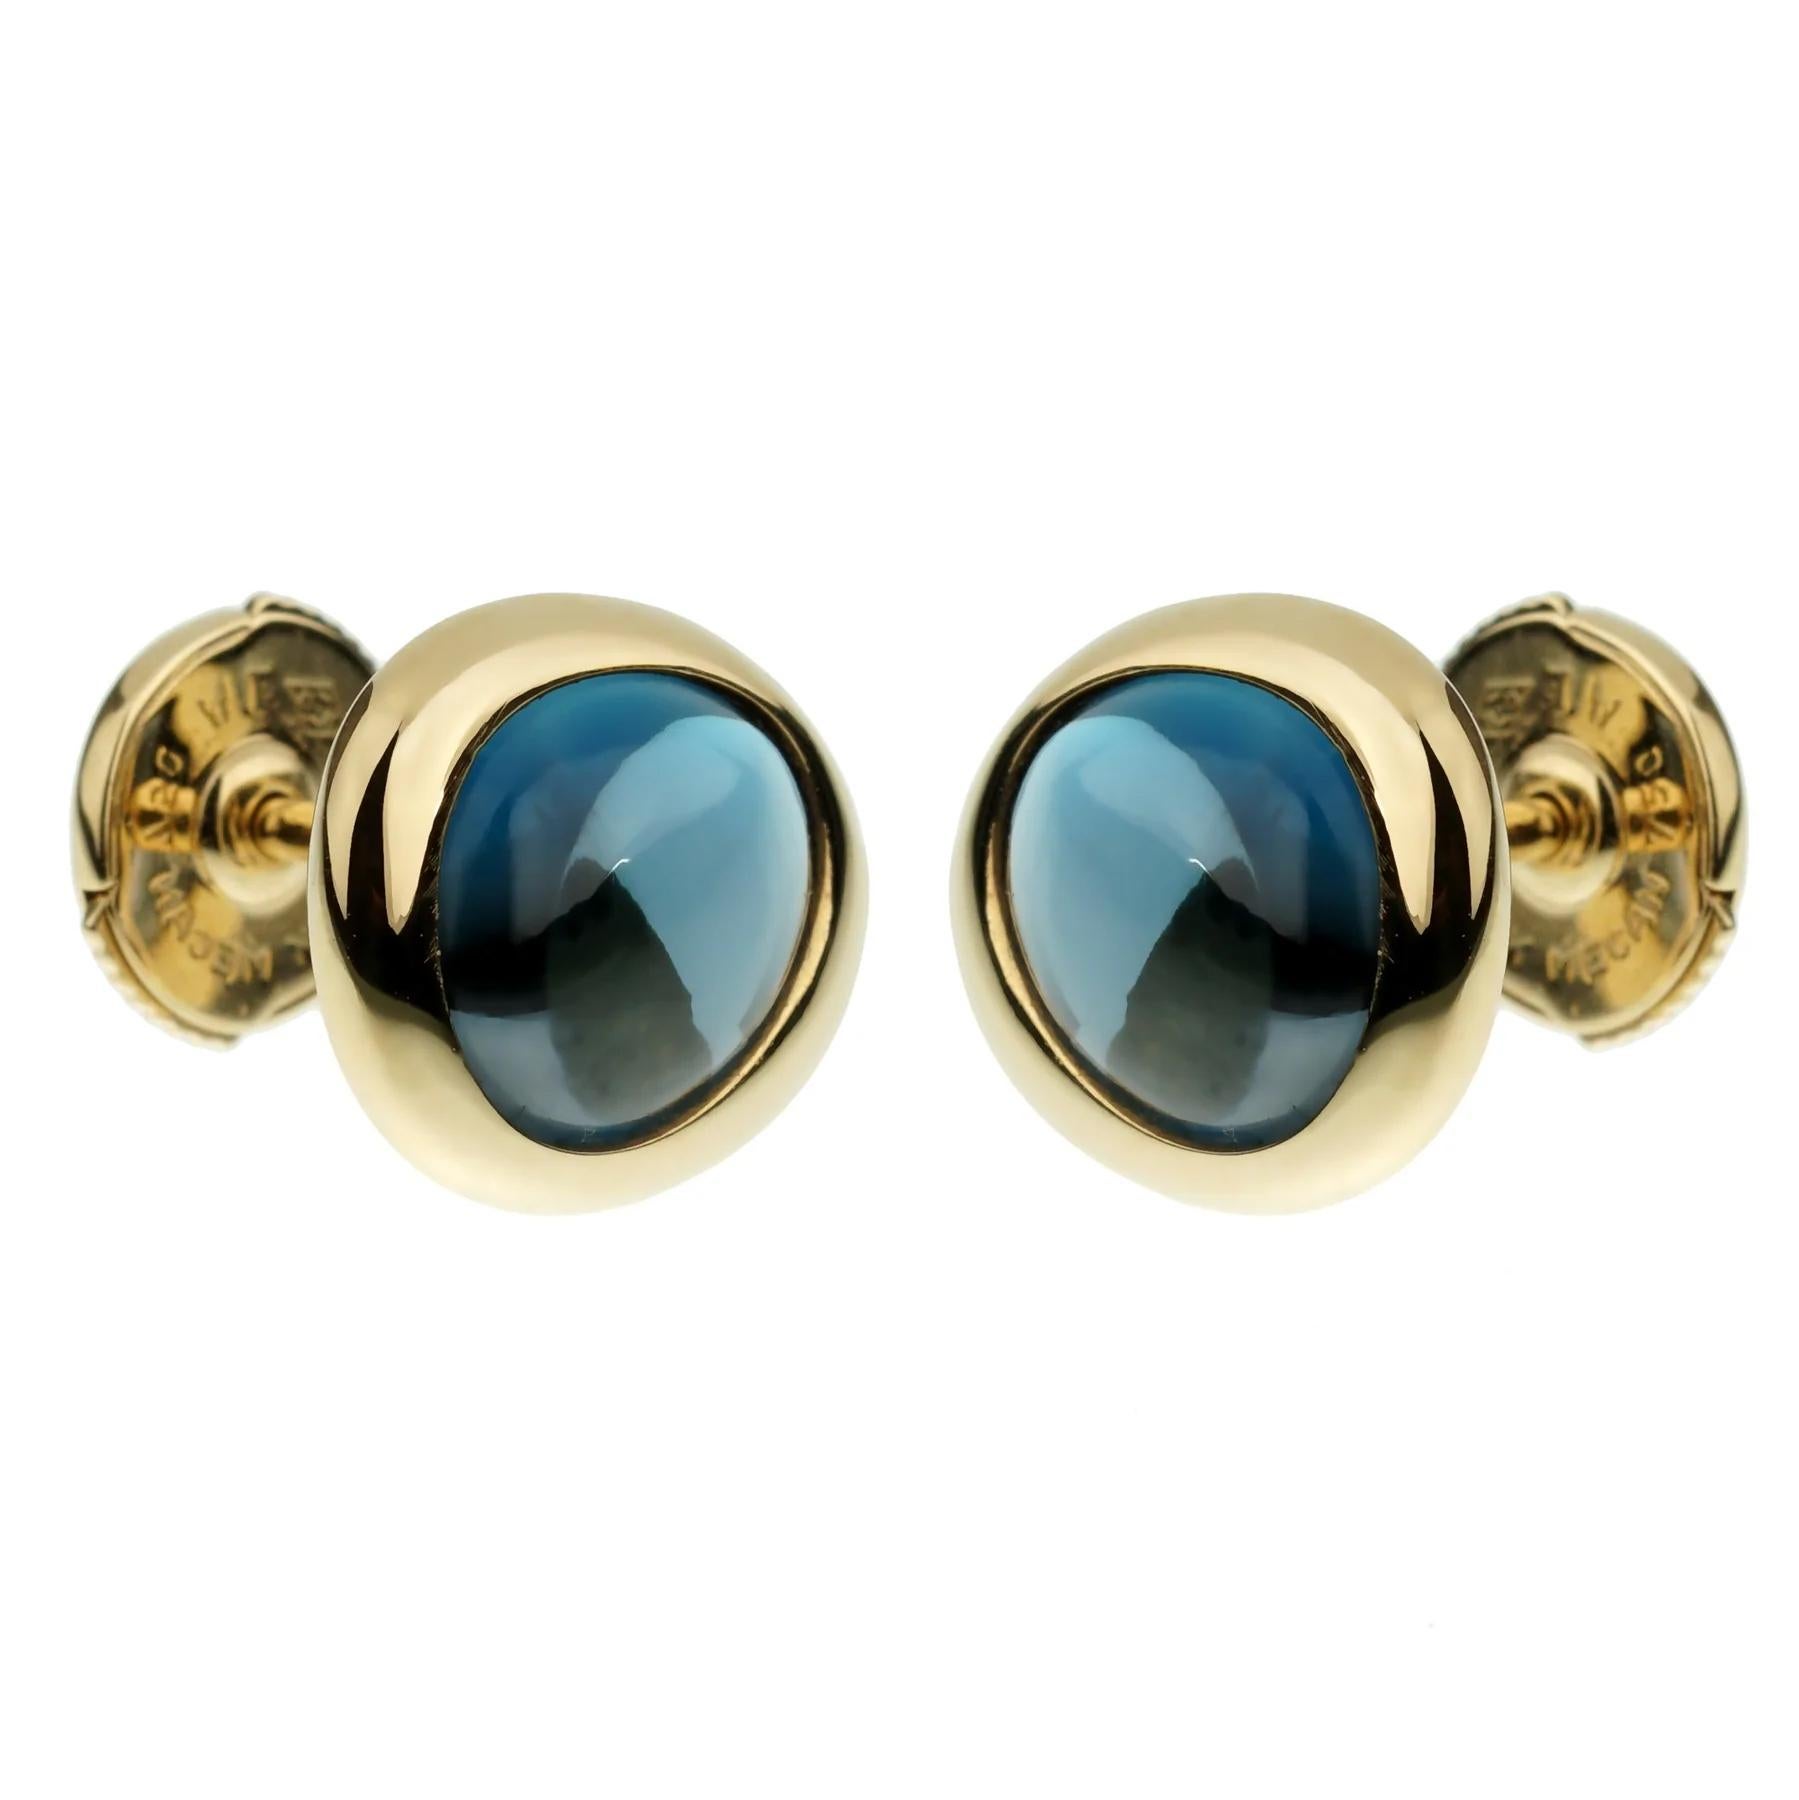 A fabulous pair of Fred of Paris yellow gold stud earrings showcasing 2 cabochon blue topaz stones set in 18k yellow gold. The earrings measure .47